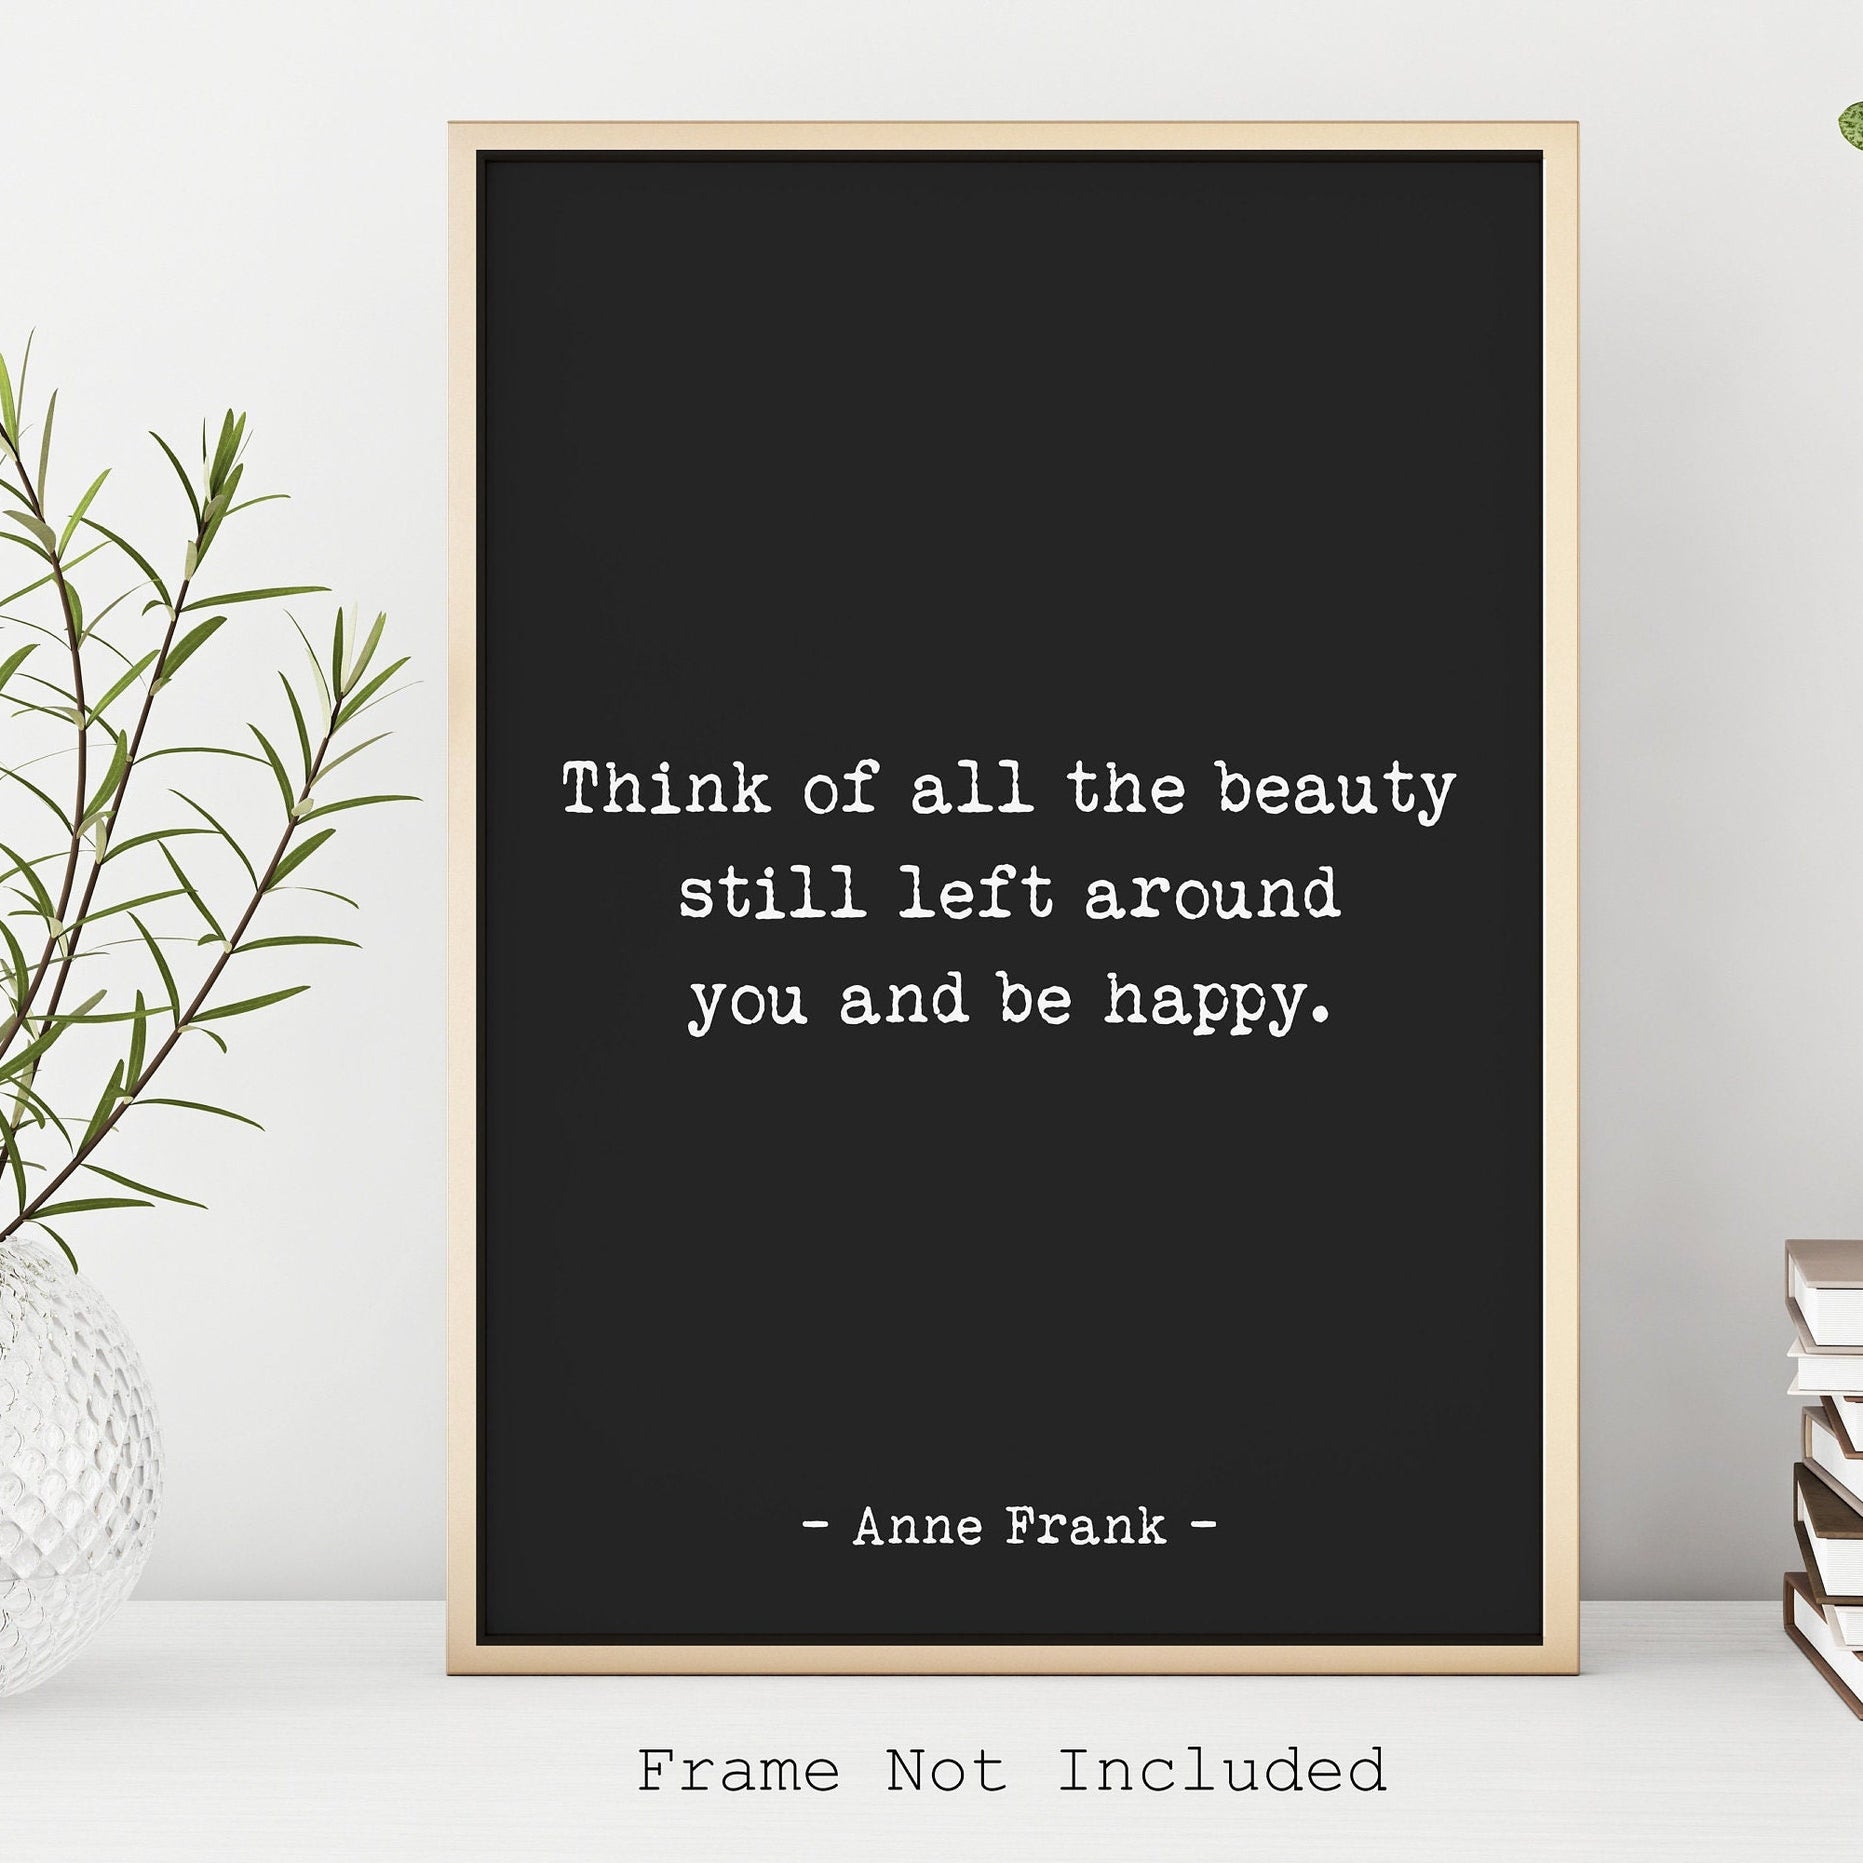 Anne Frank Think Of All The Beauty Still Left Around You And Be Happy Quote Print in Black & White